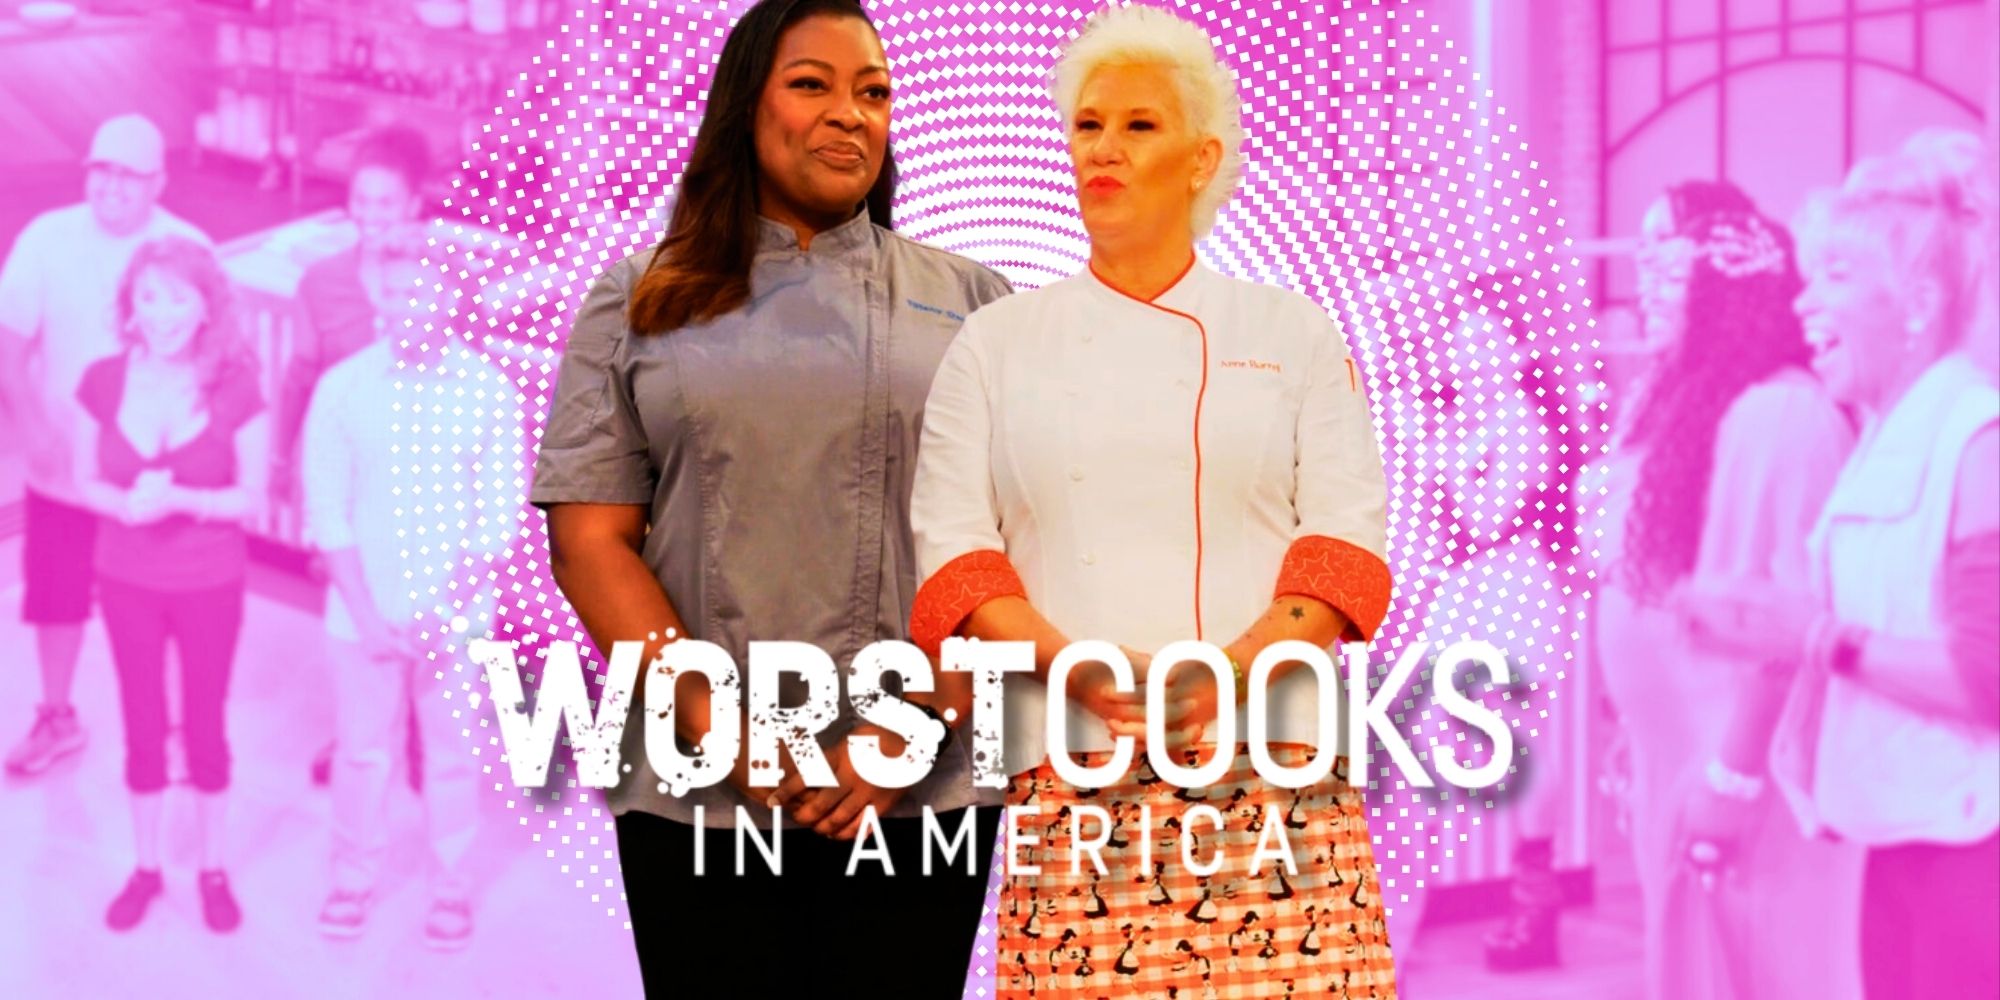 The Worst Cooks in America Season 27 A Culinary Journey of the Lavish